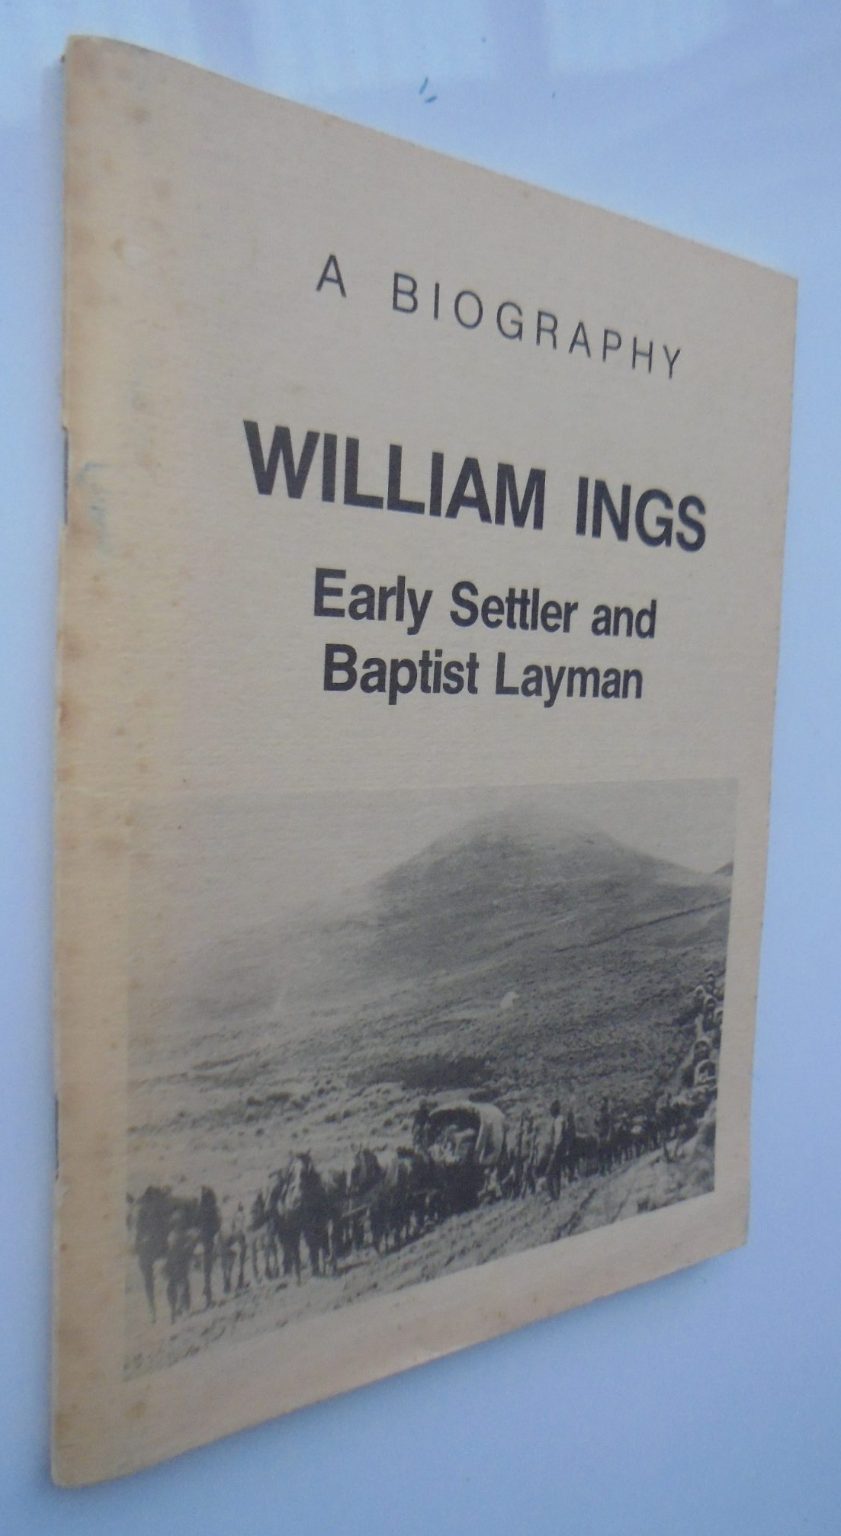 William Ings: Early Settler & Baptist Layman - A Biography by Natalie C. Fraser.